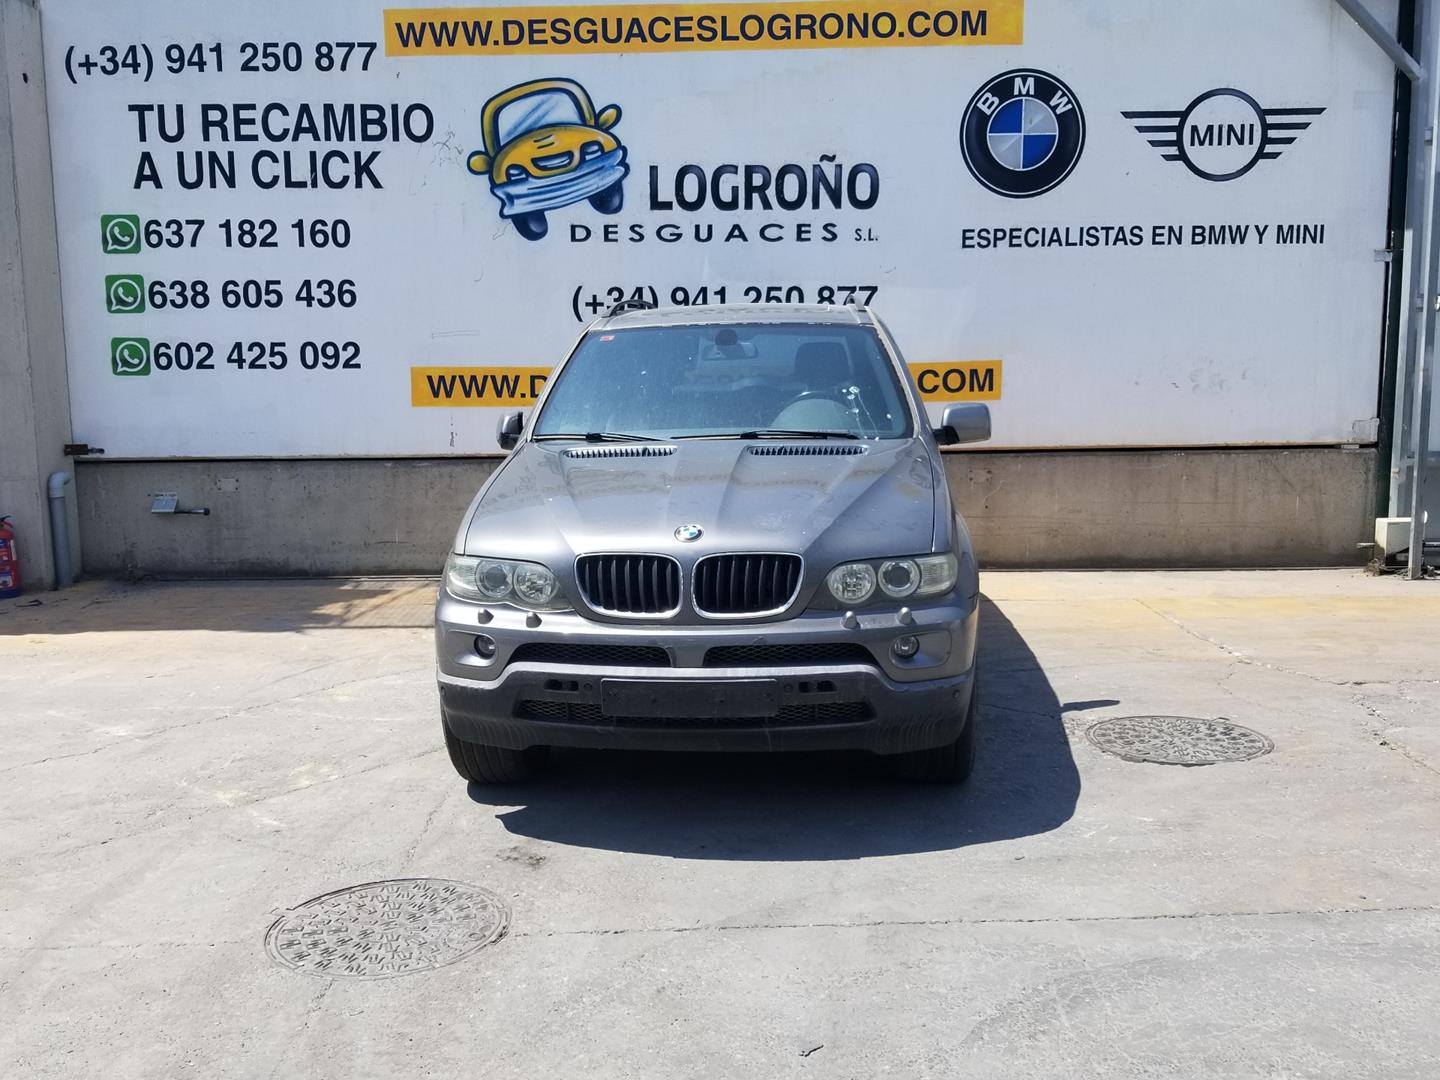 BMW X5 E53 (1999-2006) Other Control Units 61356923954, 61356923954 19833045